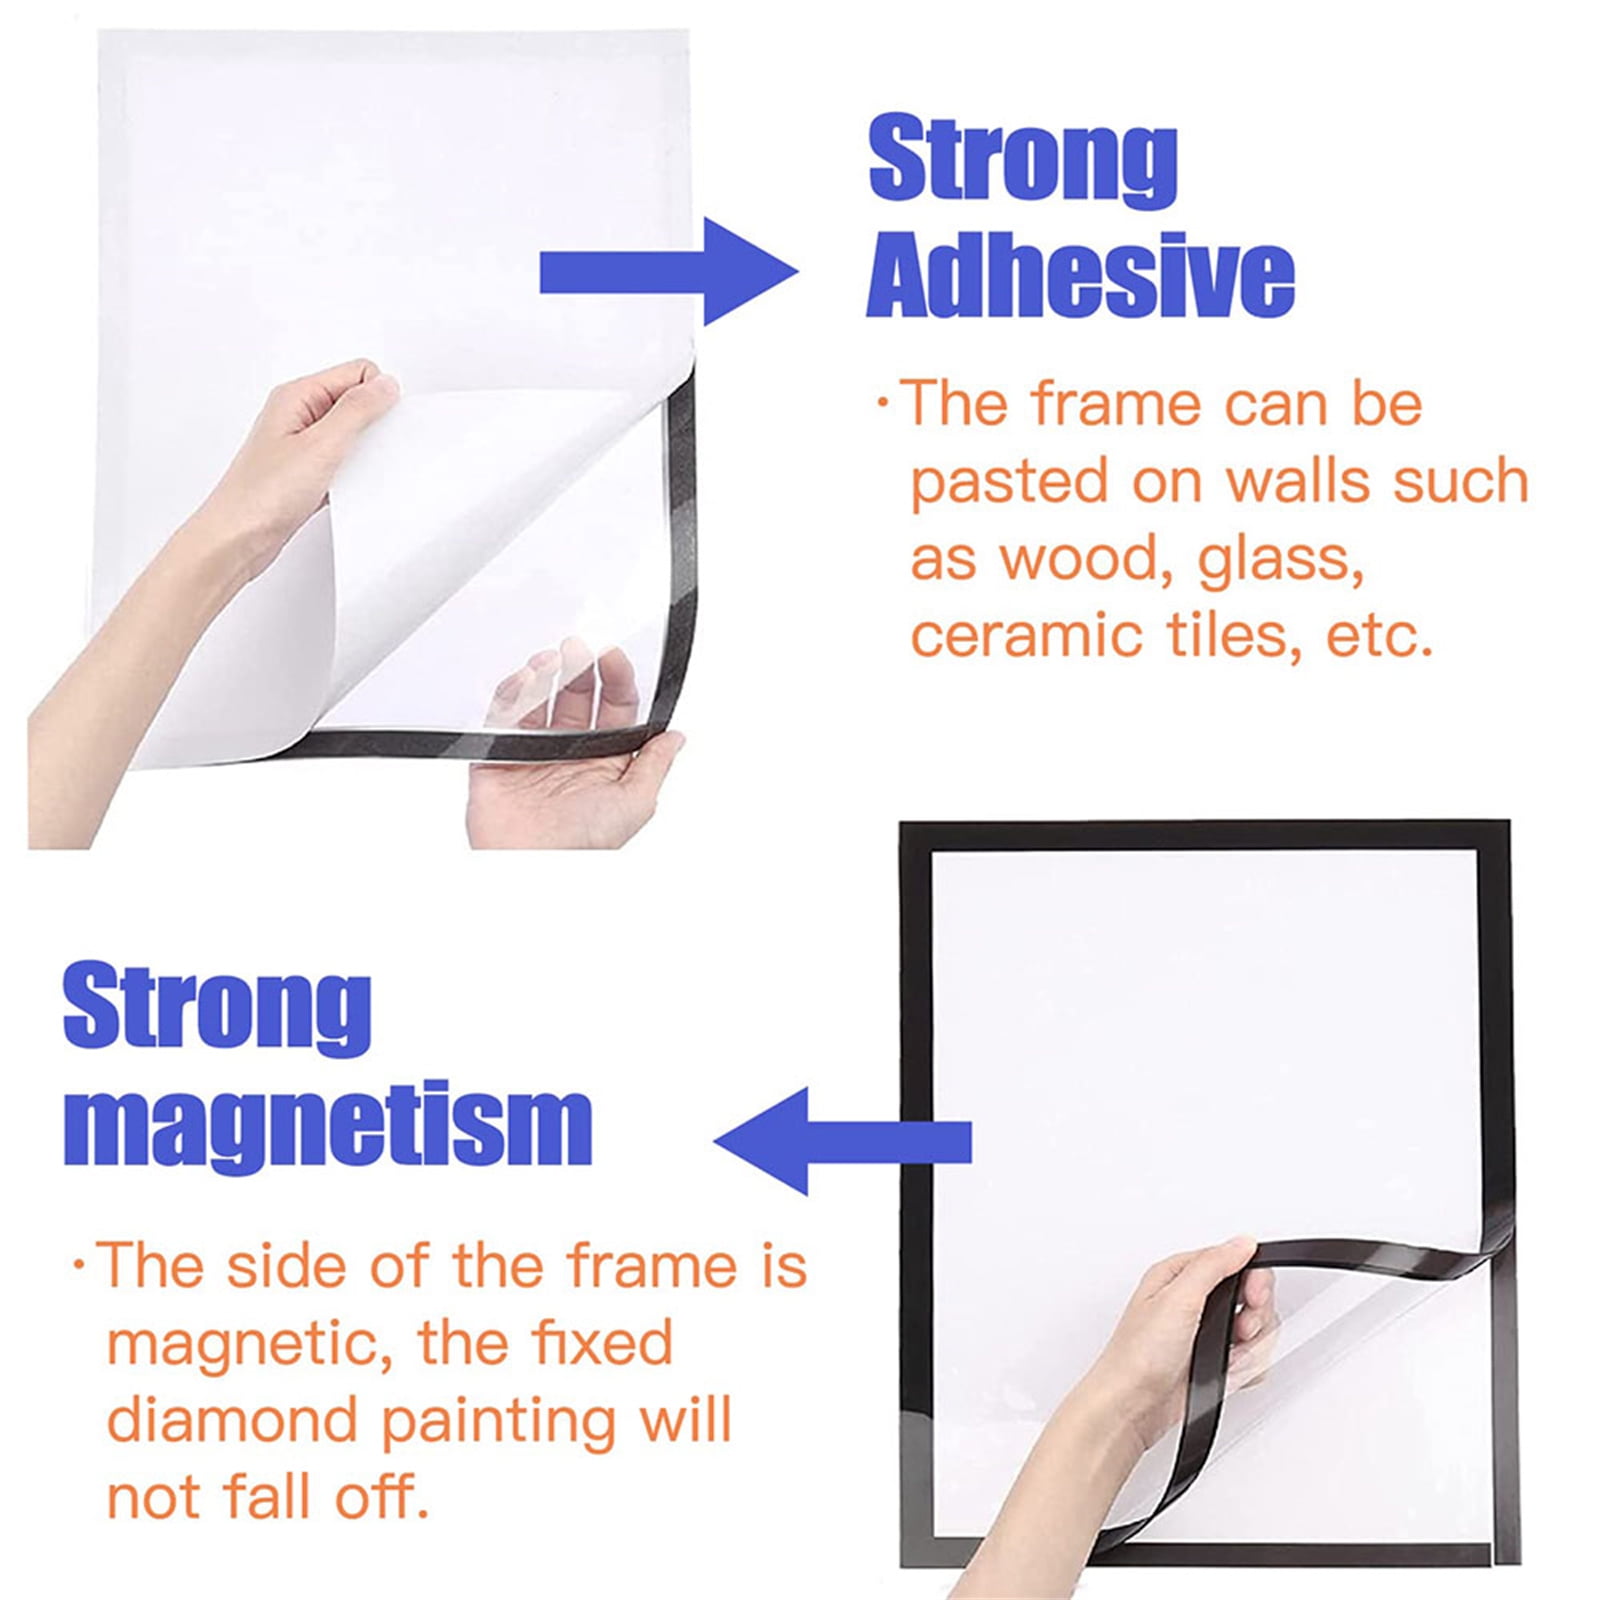  Diamond Painting Frames 30x40 cm - Diamond Art Frame 12x16 Inch  Suitable for 10x14inch Picture, Diamond Paintings Frames Magnetic  Self-Adhesive,Suitable Diamond Painting Kits Frames for Wall Window Door -  6 Pack (